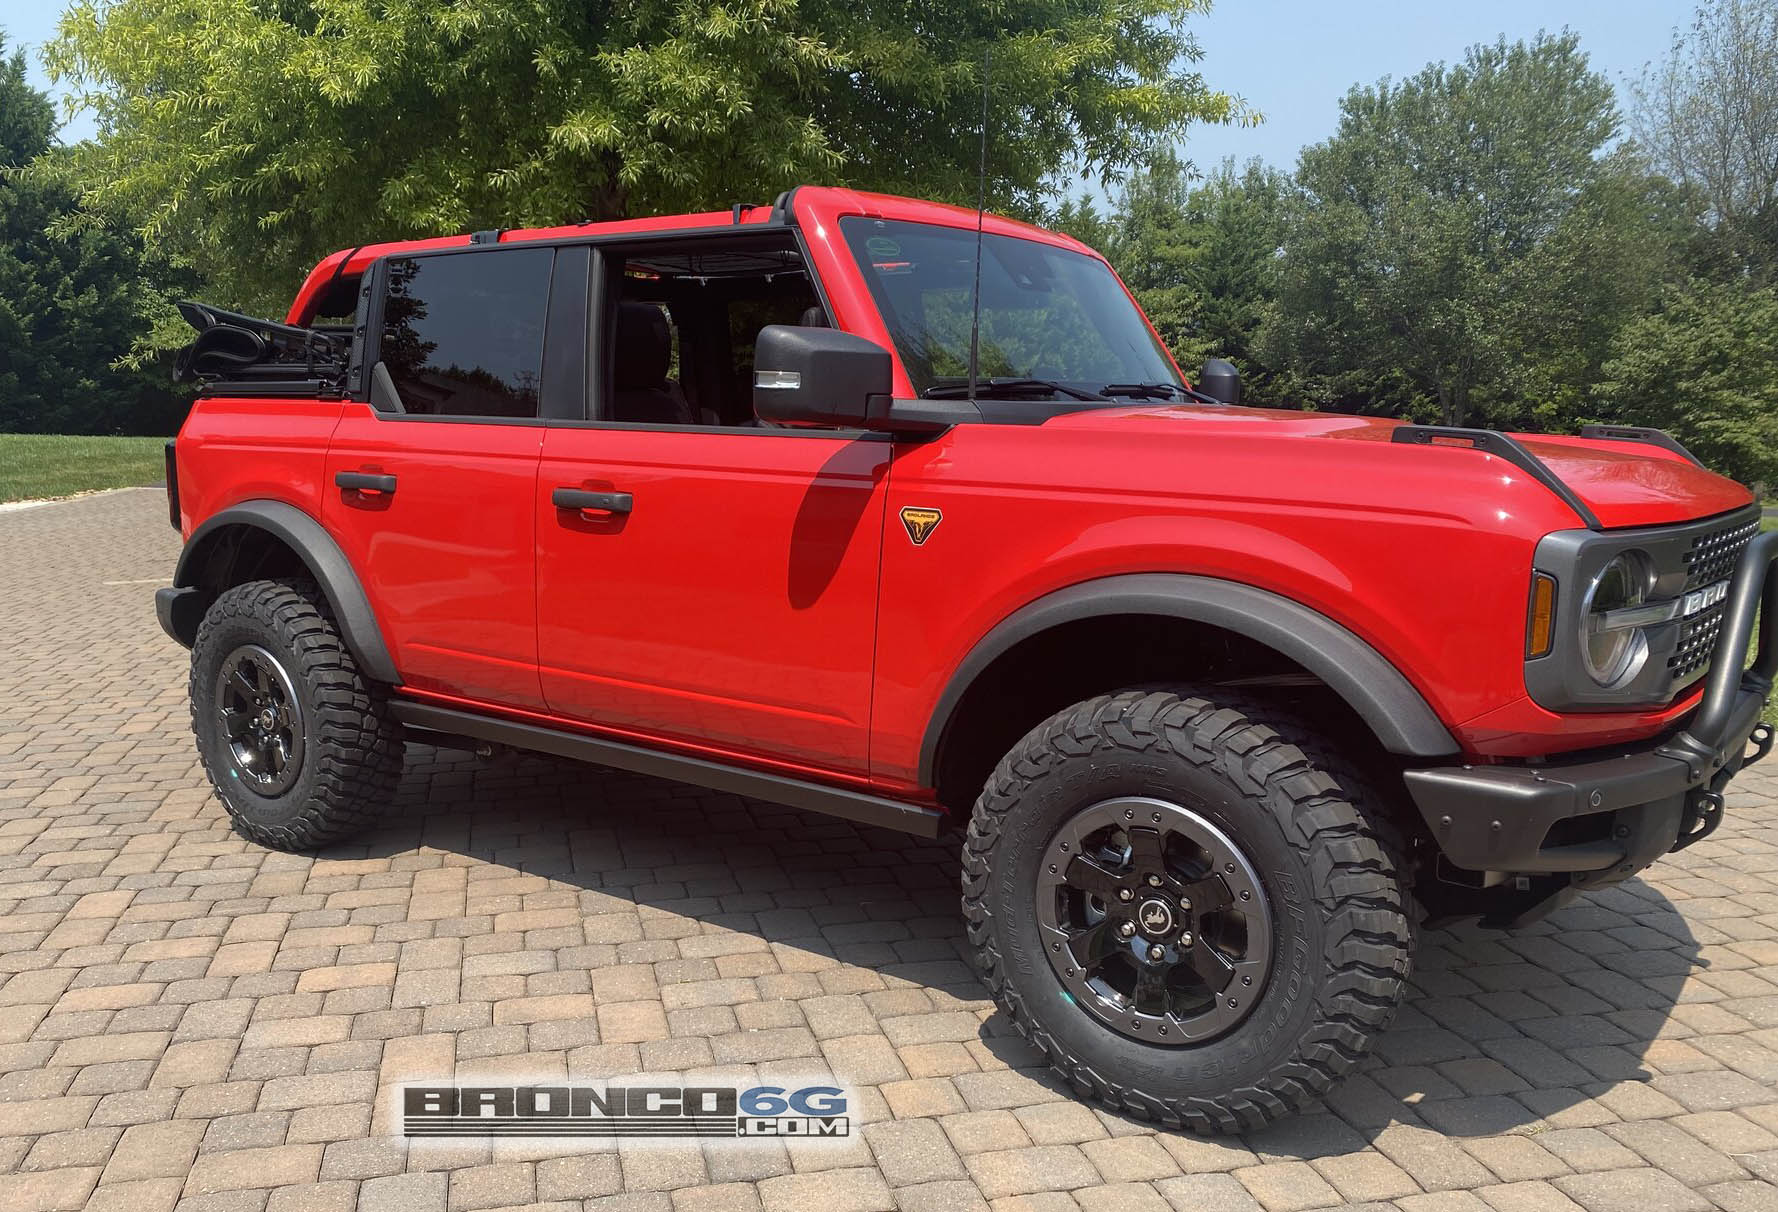 Ford Bronco BFG KM3 M/T Tires (285/75/17) Fitted on 2021 Bronco Badlands 2021 Bronco Badlands on 285:75:17 BFG M:T tires 1